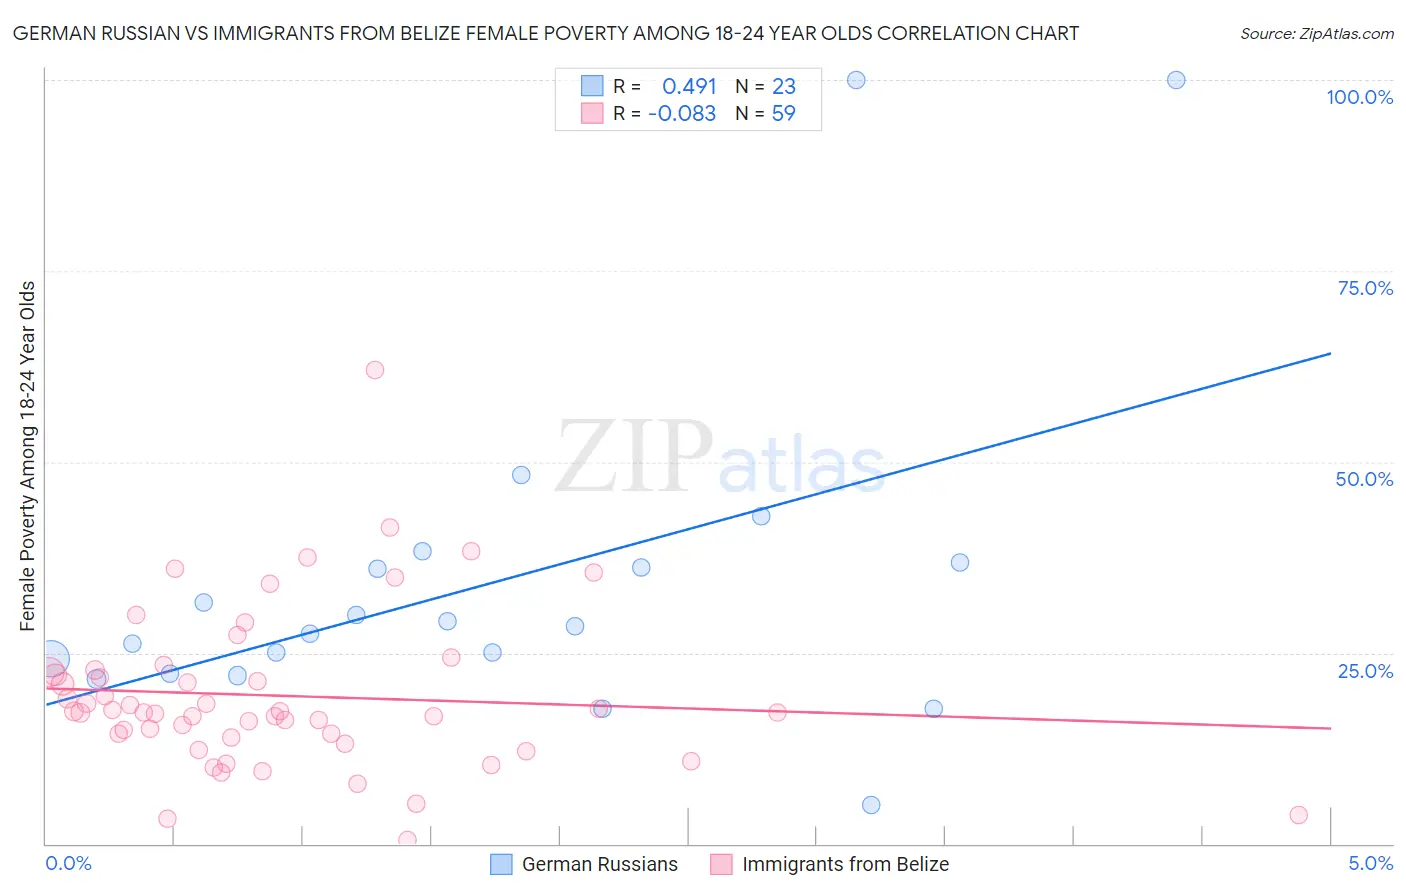 German Russian vs Immigrants from Belize Female Poverty Among 18-24 Year Olds